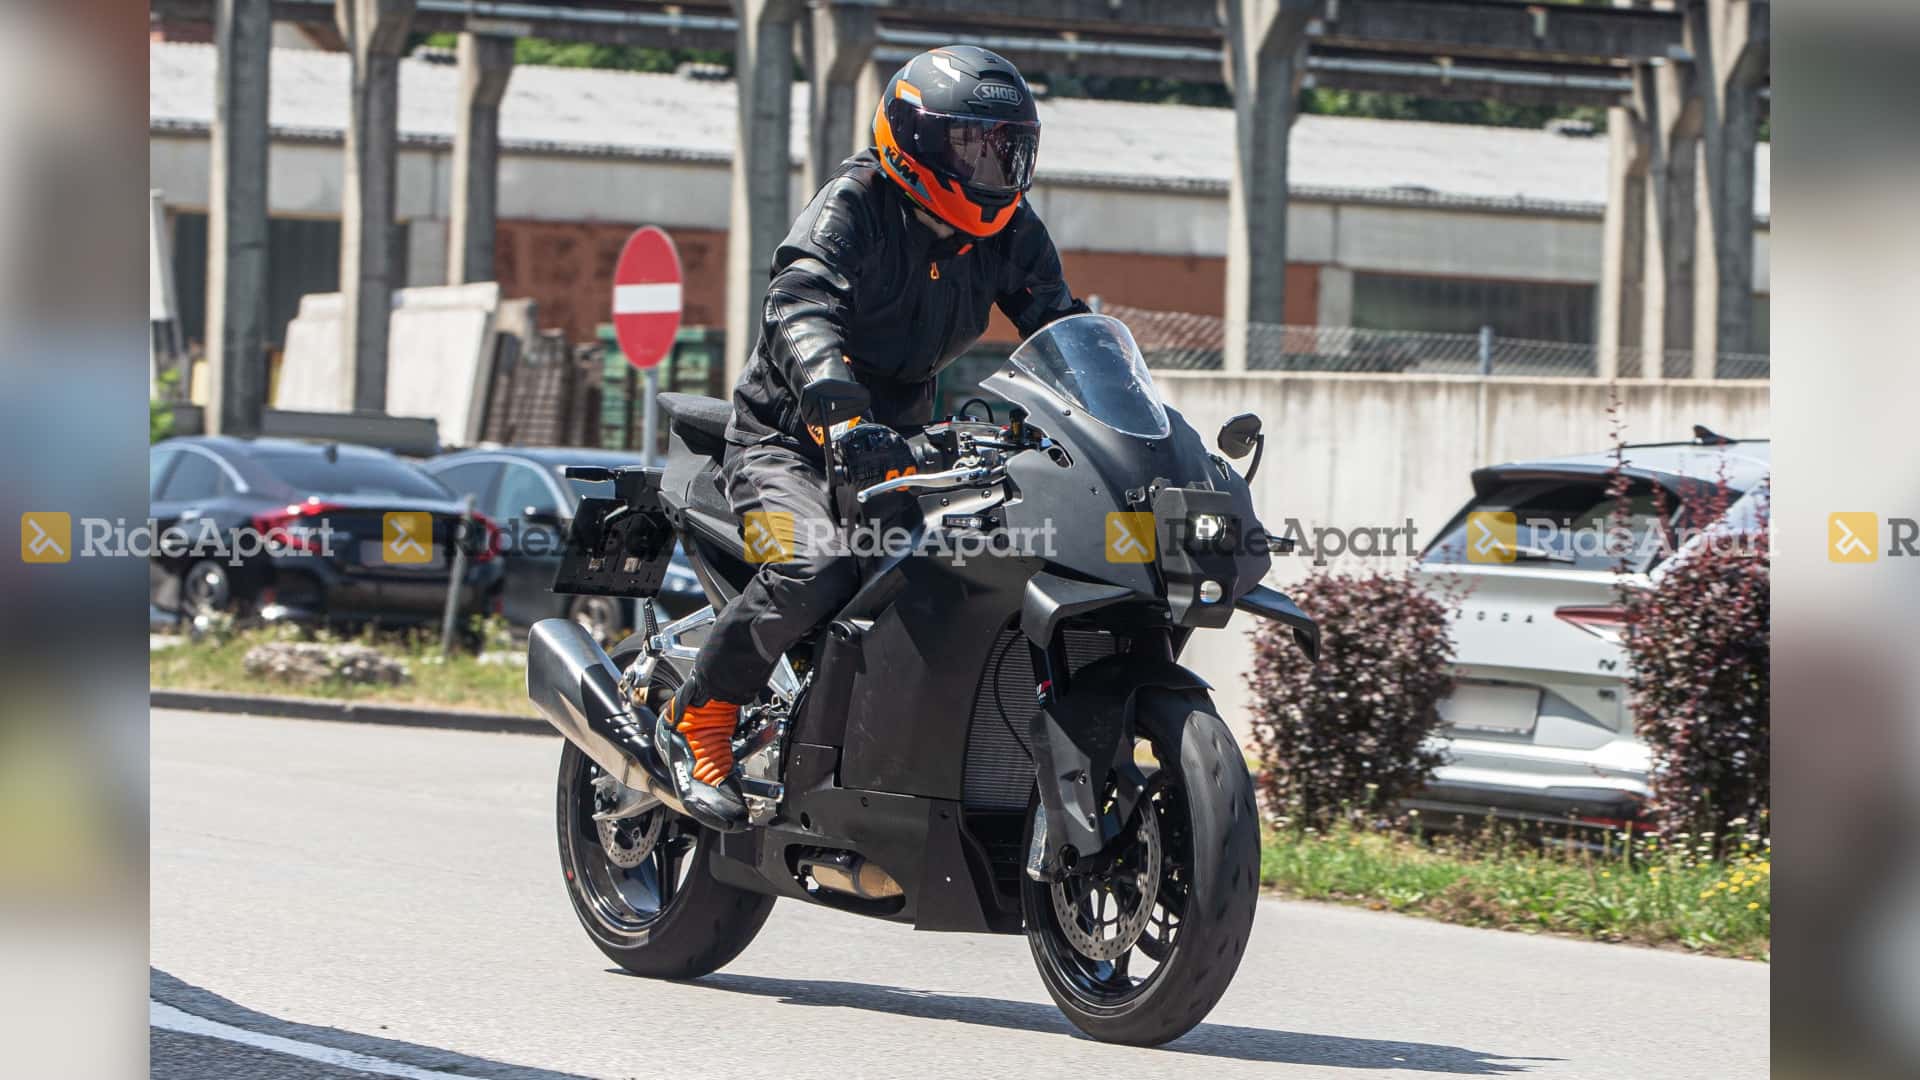 KTM RC 990 Sports Bike Spotted - The Faired Version of Duke 990 - foreground